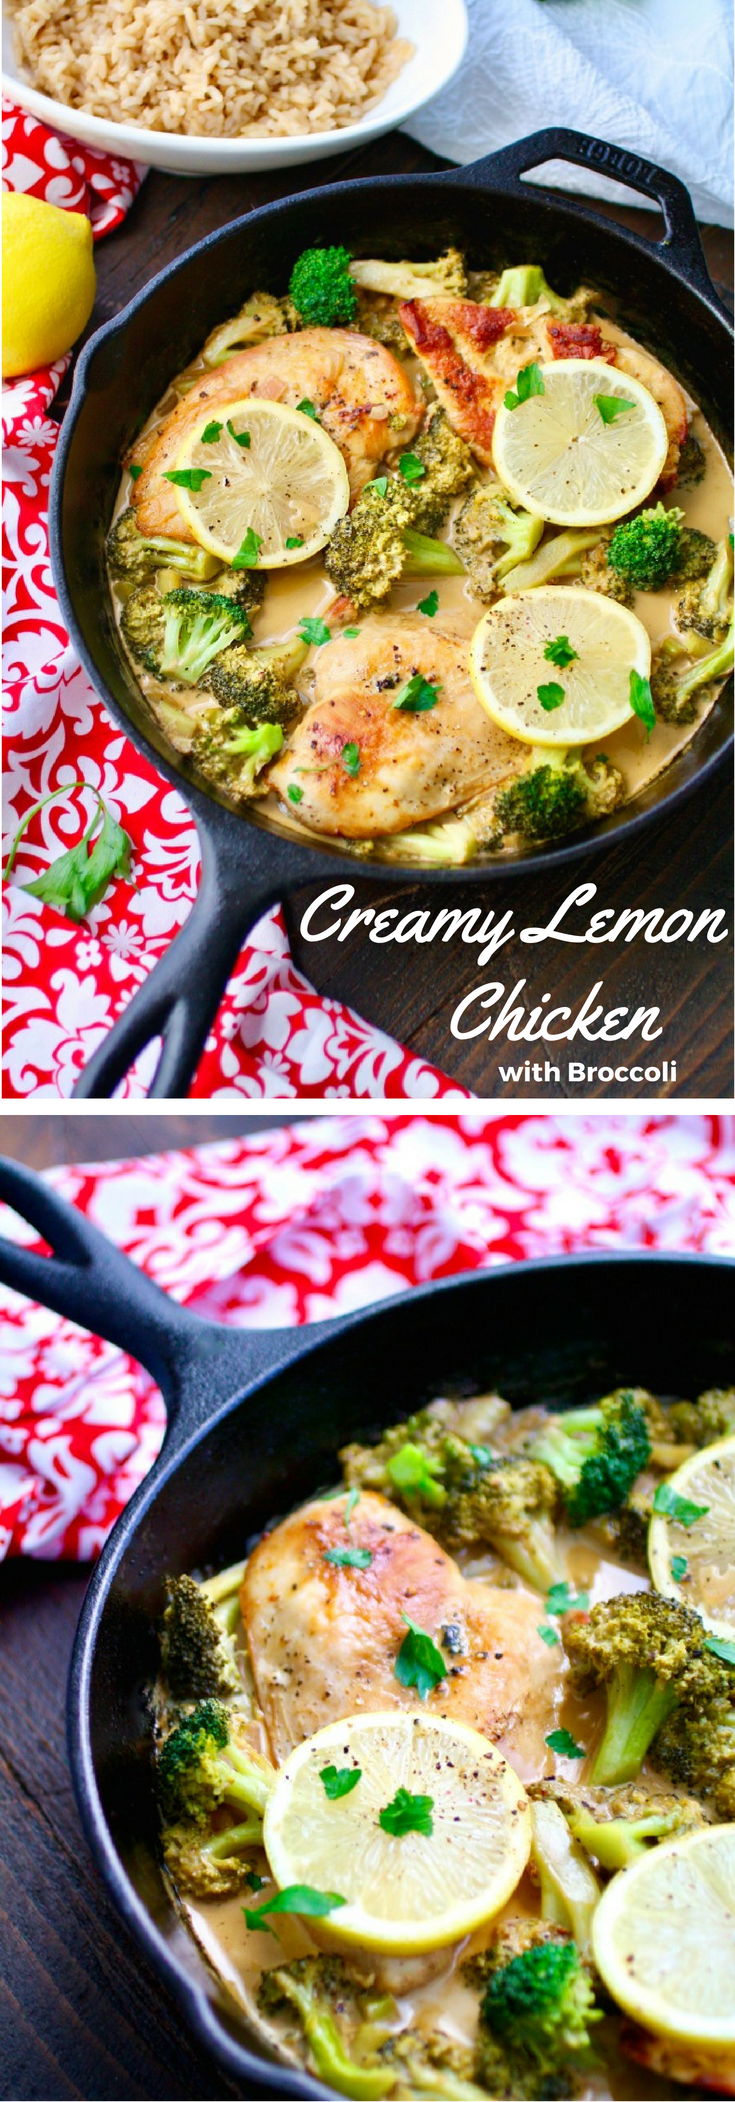 A lovely meal to brighten up your winter: Creamy Lemon Chicken with Broccoli - no fuss, and big on flavor!